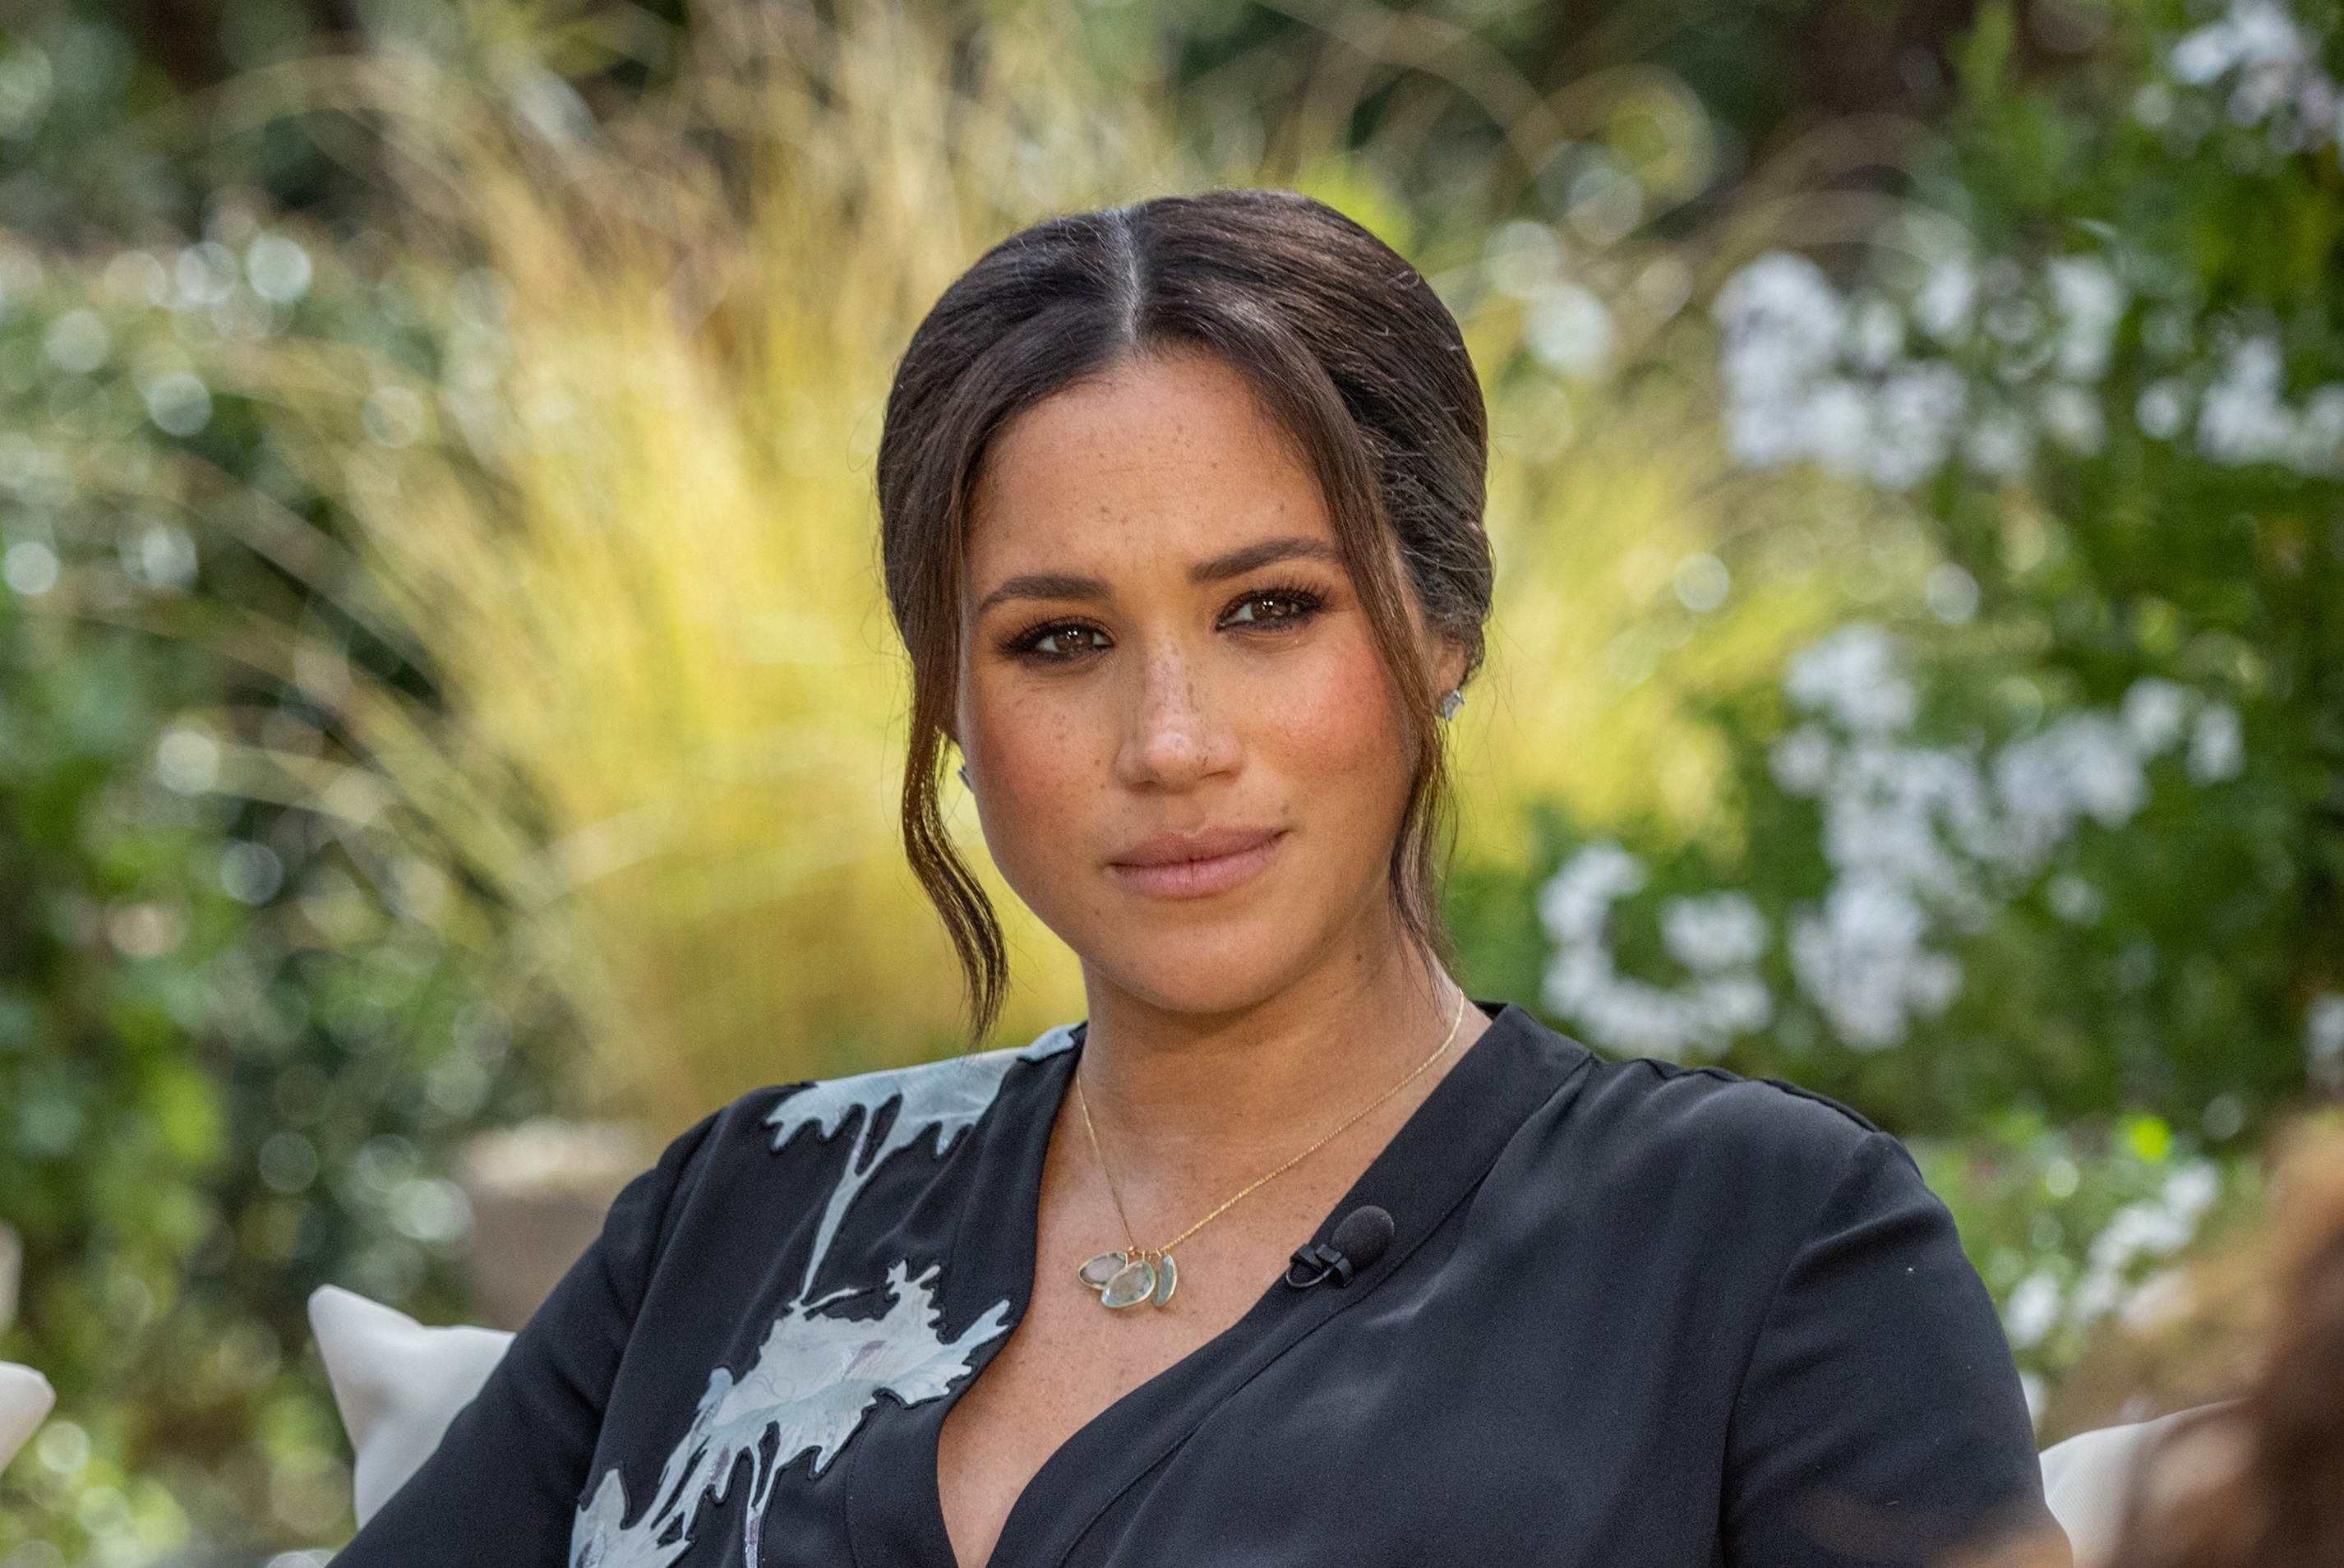 Meghan Markle for President? Here Are the Odds on the Duchess Winning